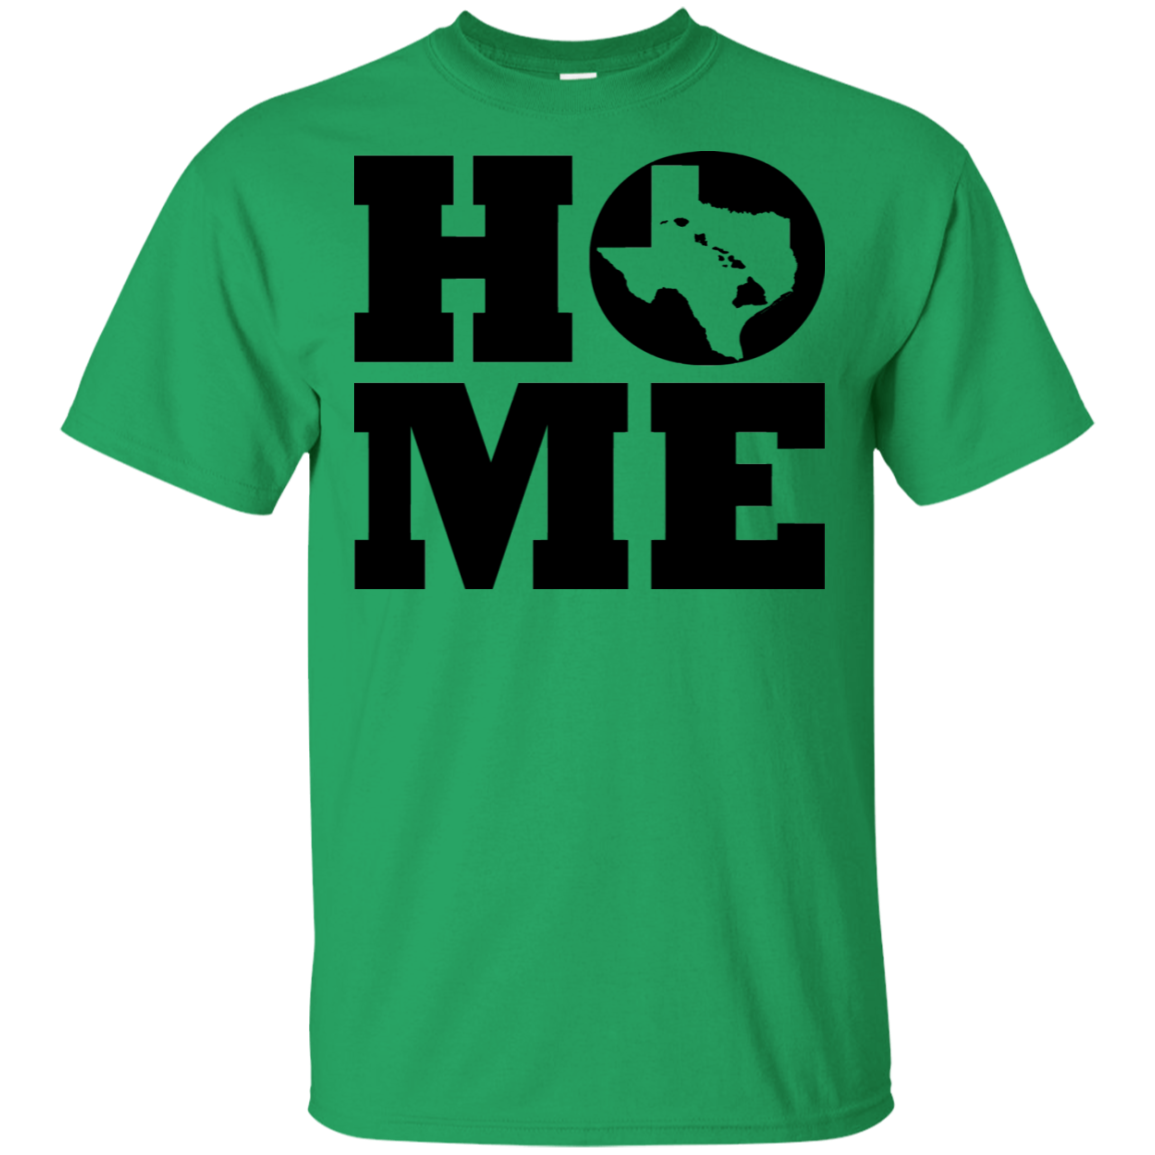 Home Roots Texas and Hawai'i Ultra Cotton T-Shirt, T-Shirts, Hawaii Nei All Day